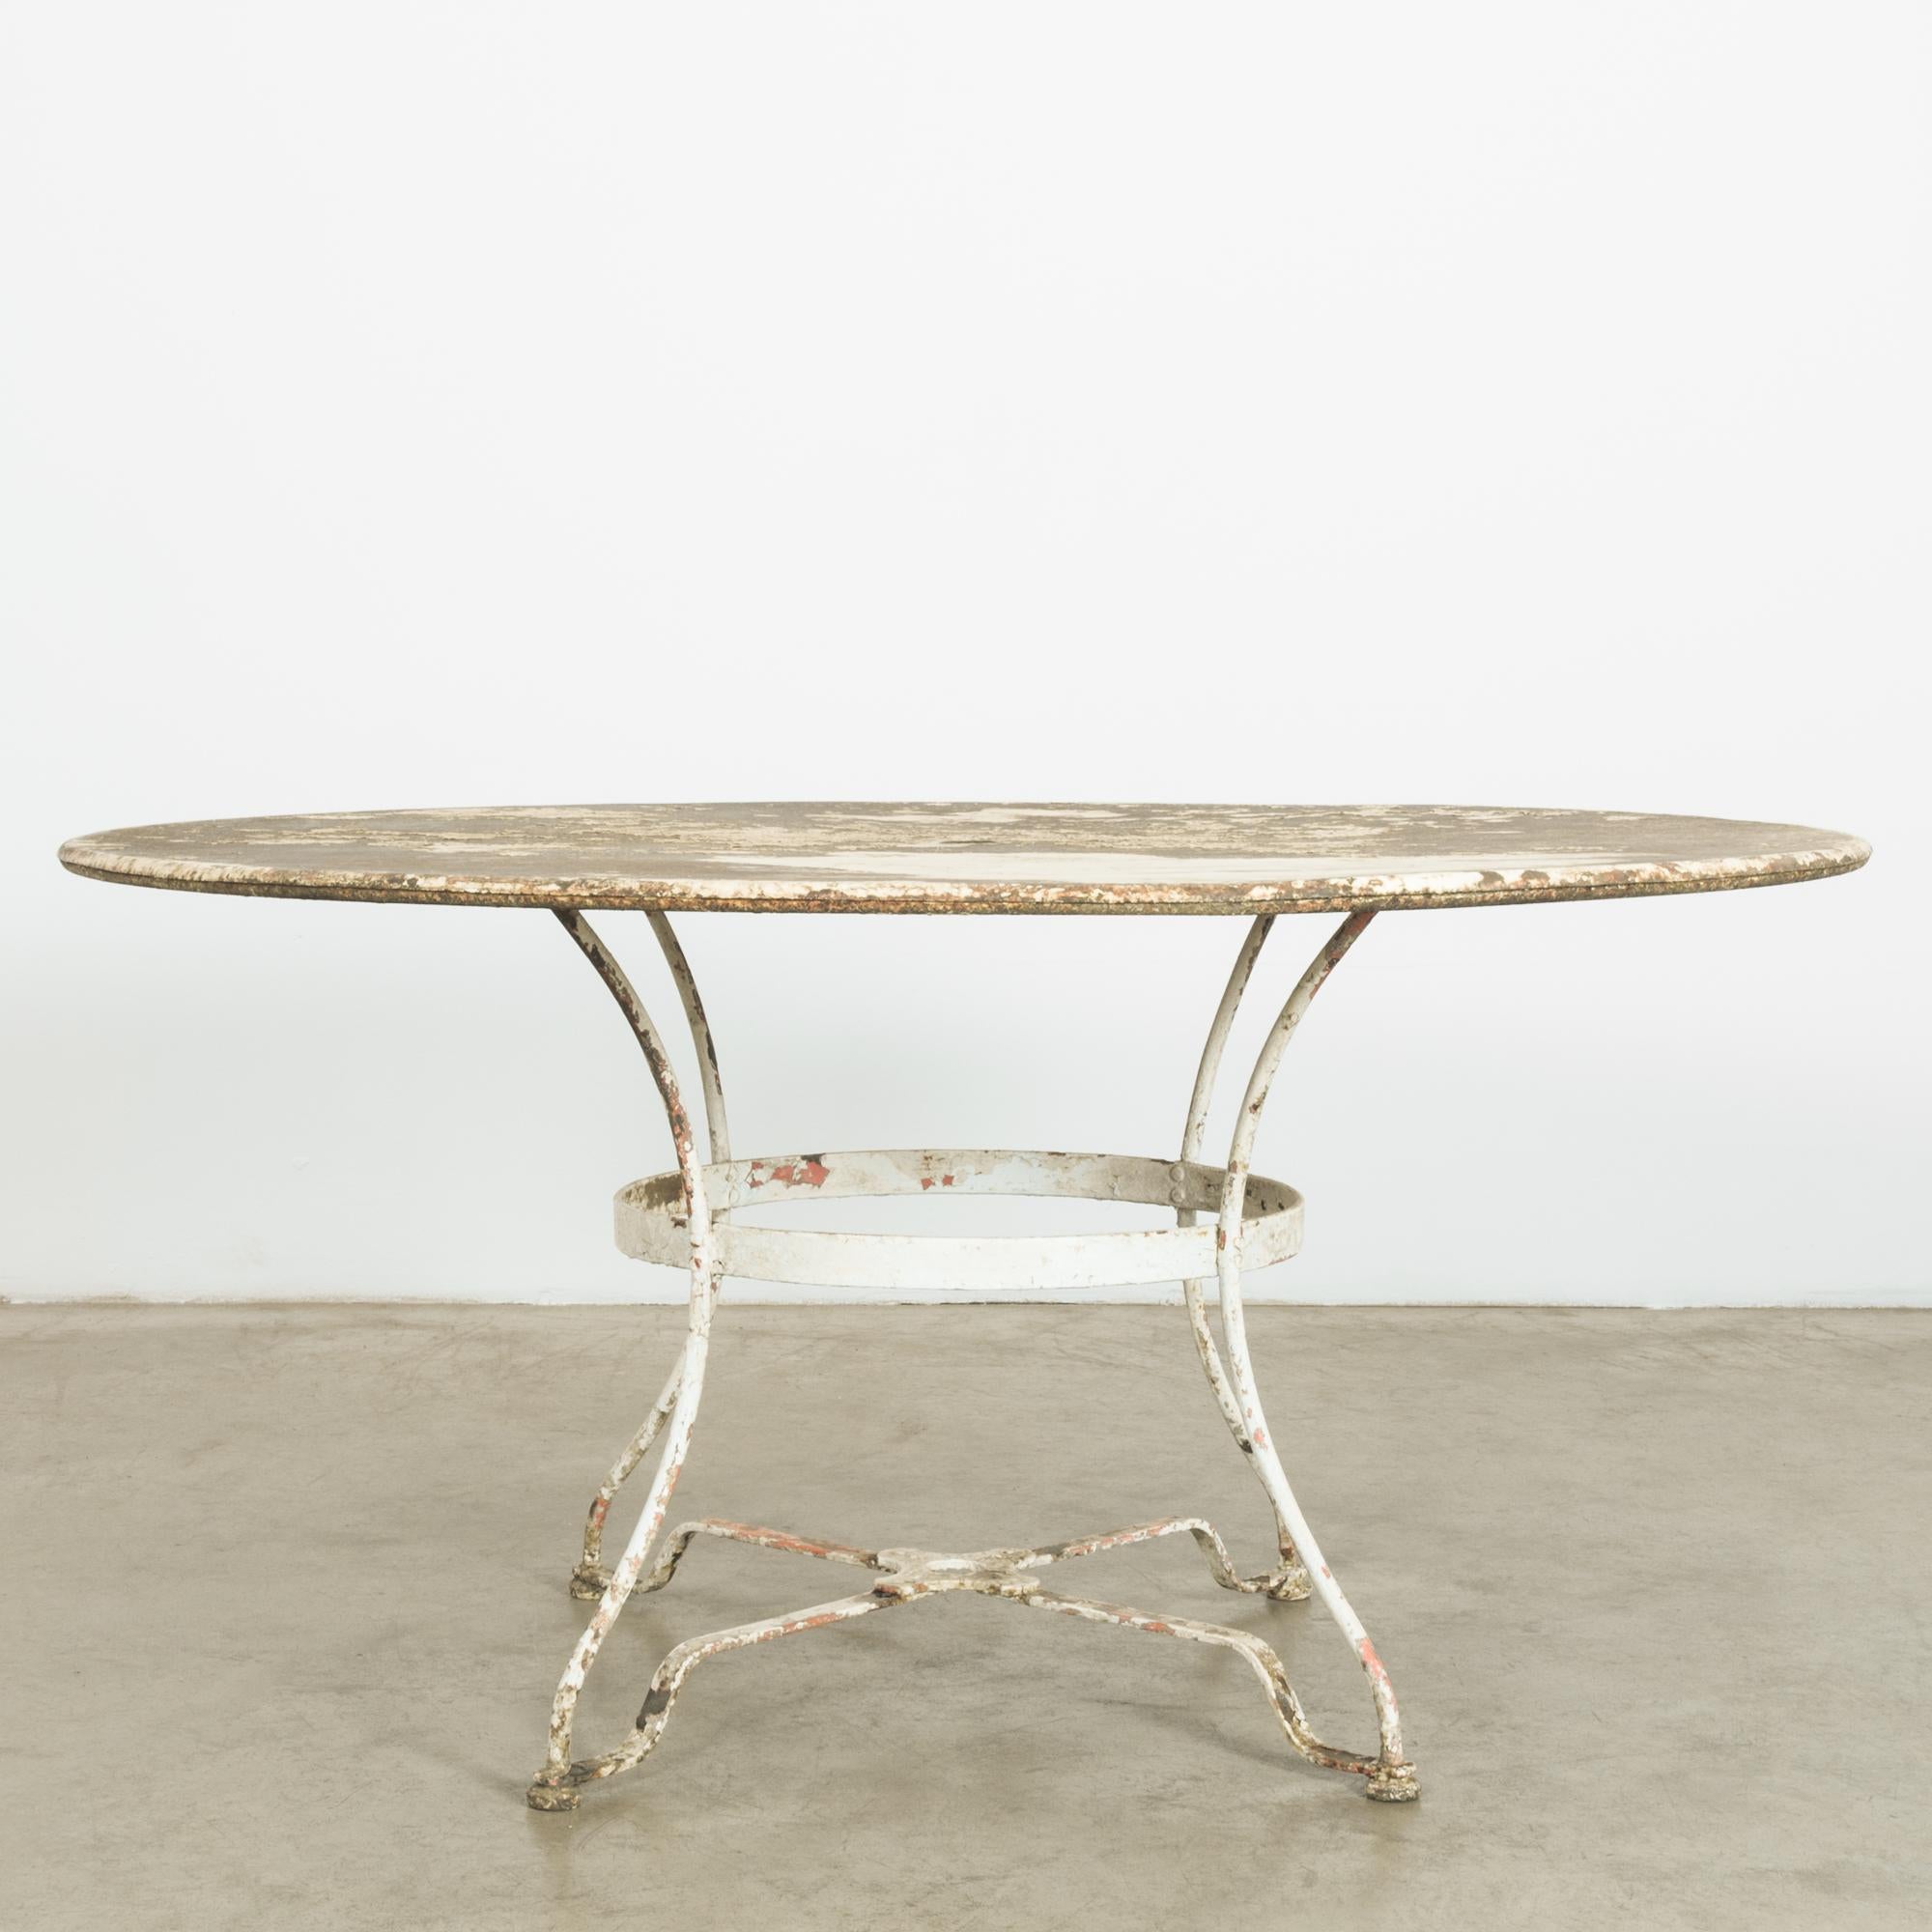 A white patinated metal table from France, produced circa 1920. Four parabolic legs, connected by umbrella stand fixture, support a broad tabletop with original patination. Sun-drenched and marvelously aged, this charming garden table sings of blue